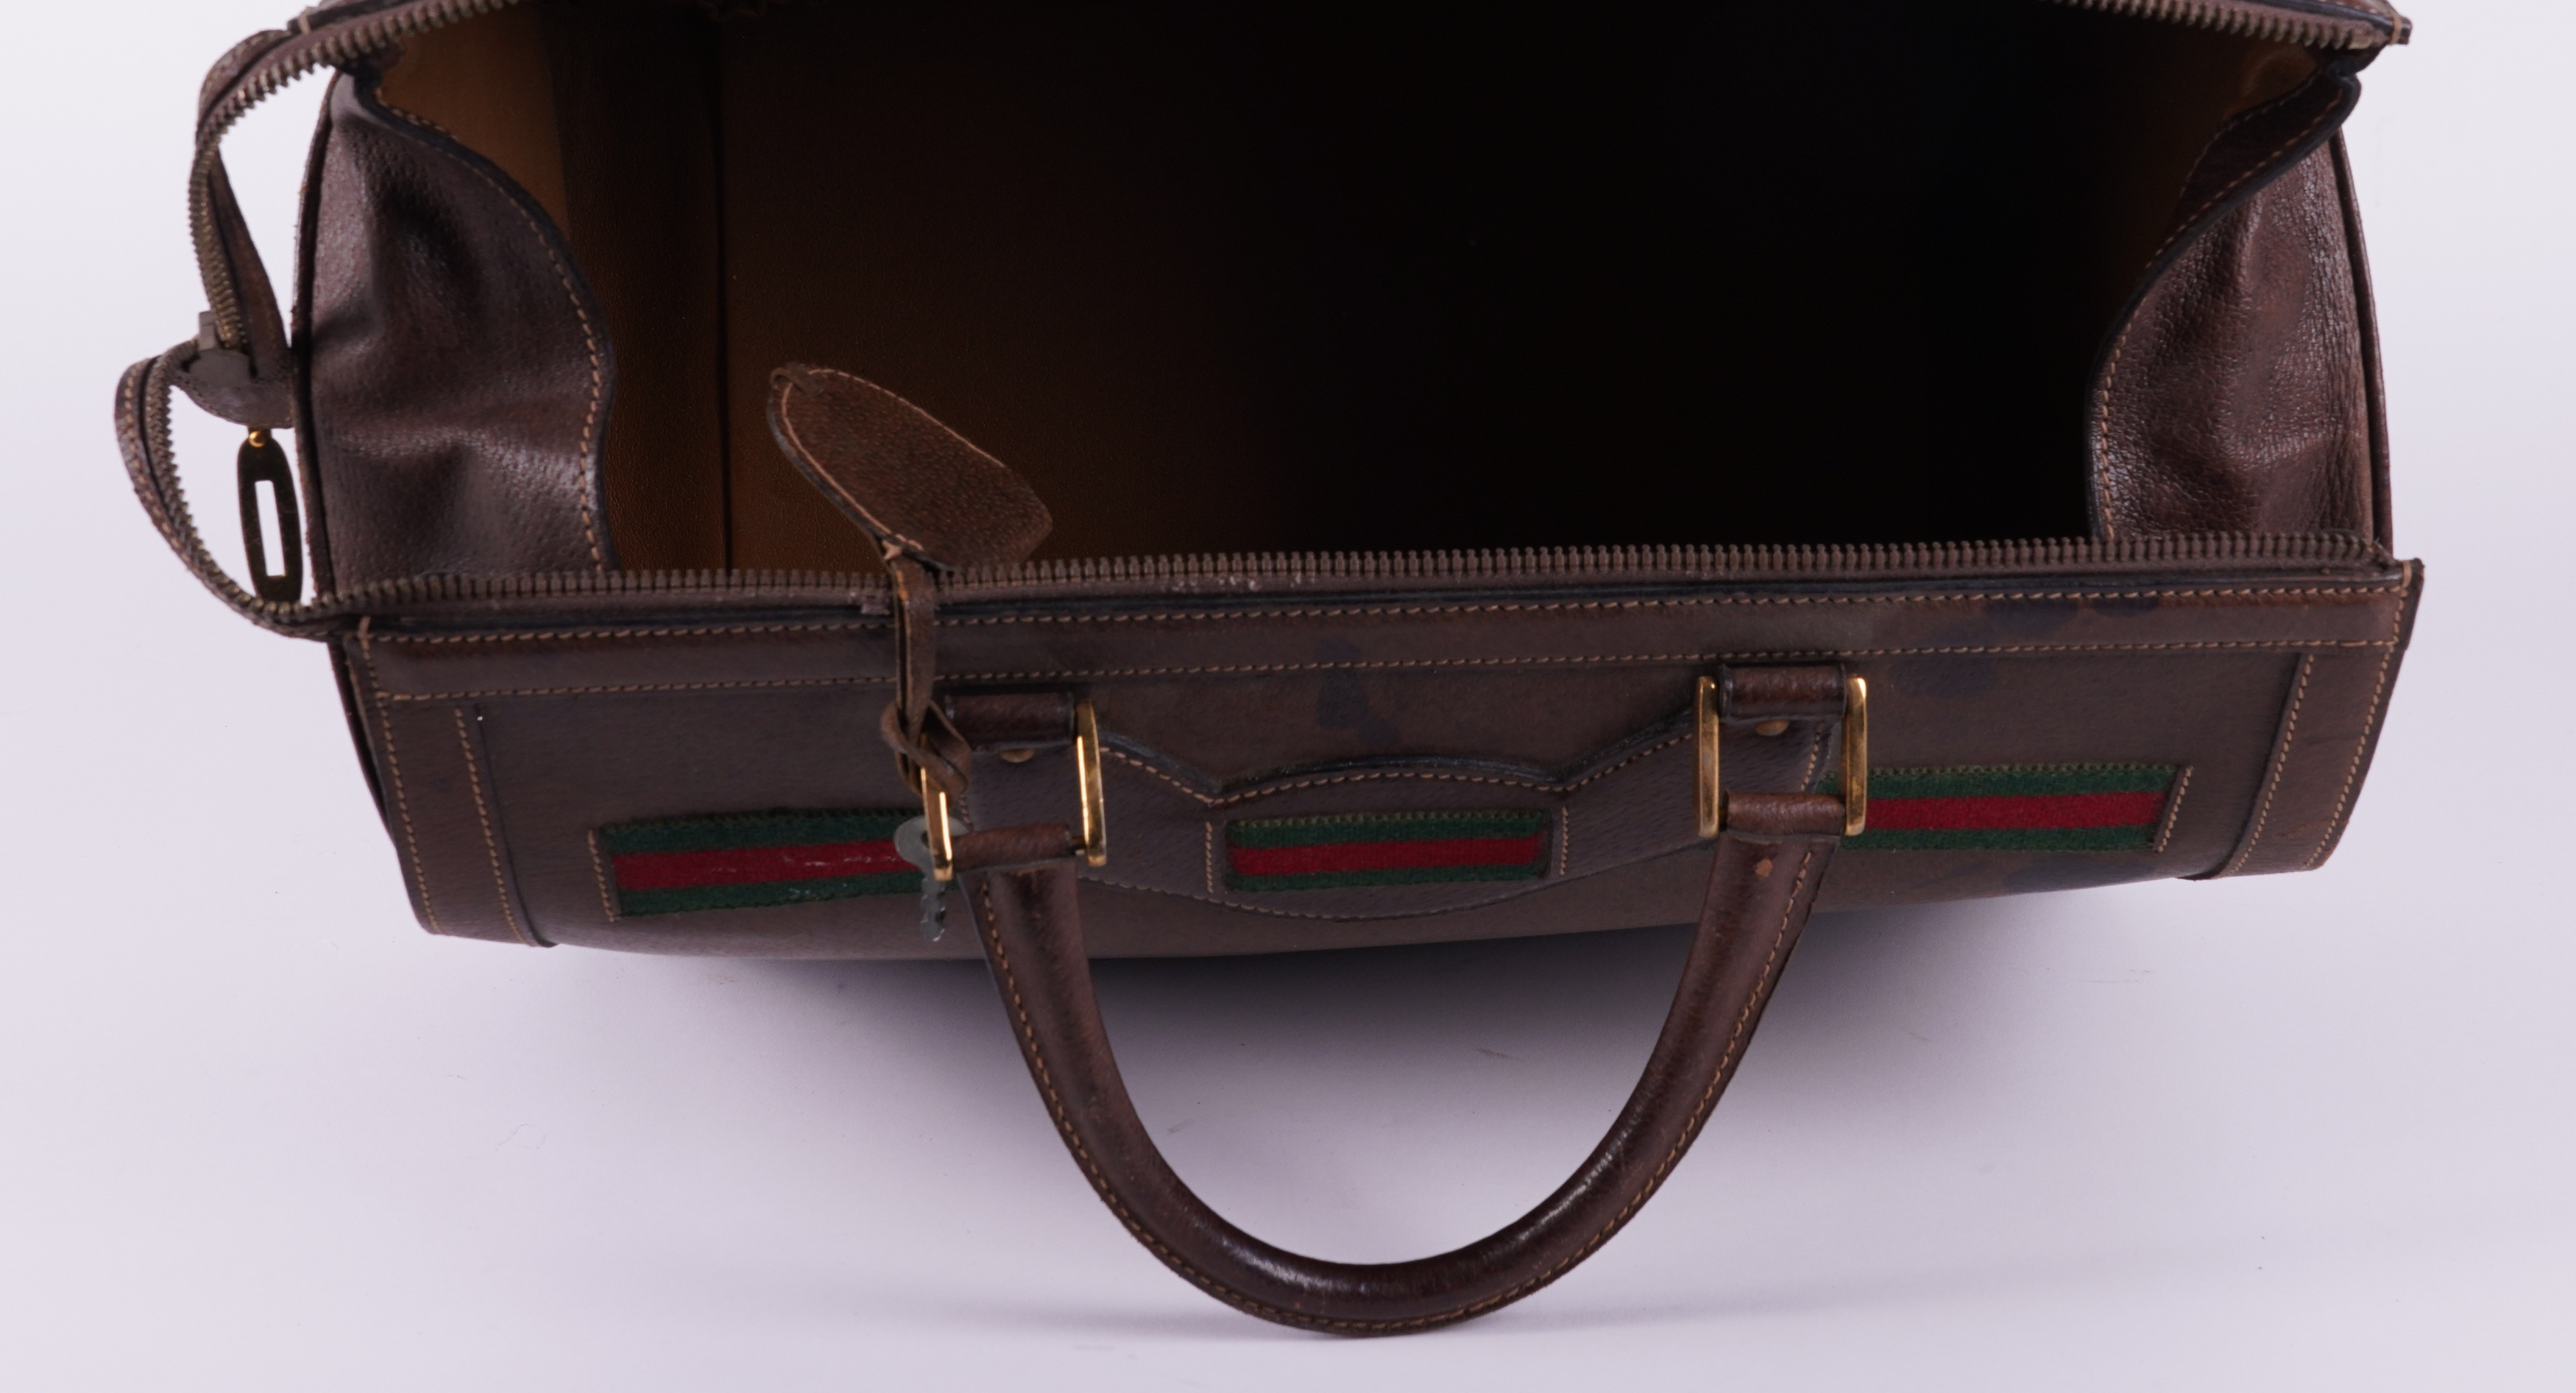 GUCCI: A BROWN LEATHER HOLDALL - Image 5 of 6